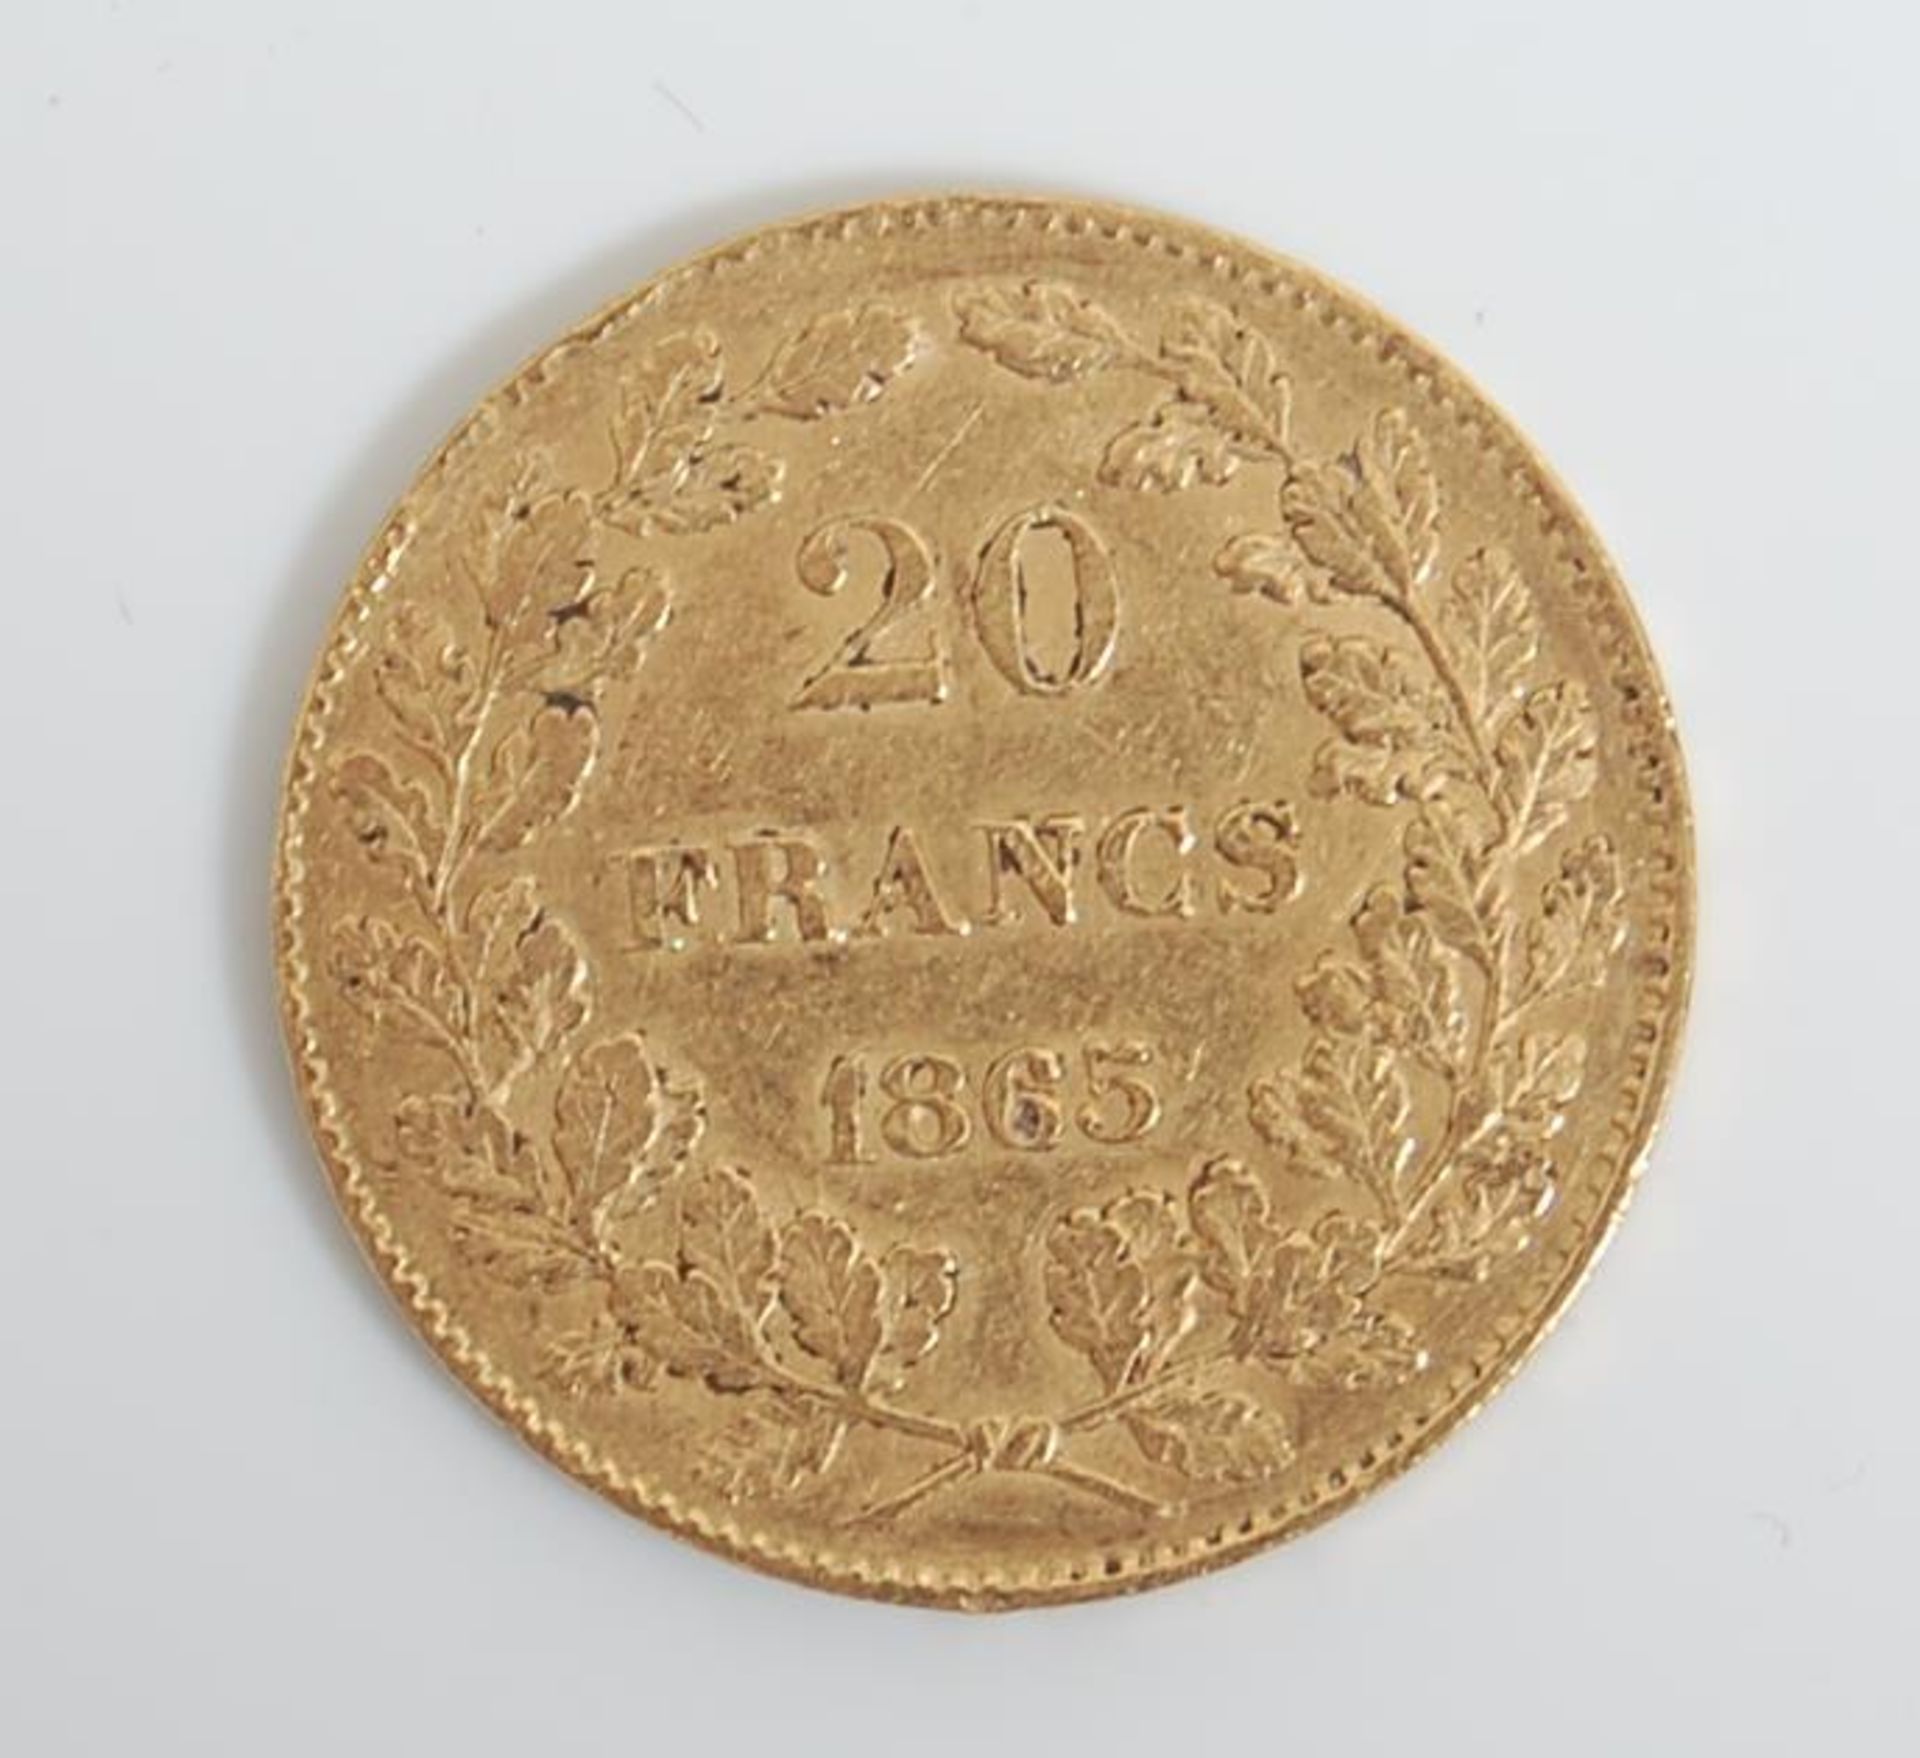 19TH CENTURY BELGIAN FRANC GOLD COIN - Image 2 of 3